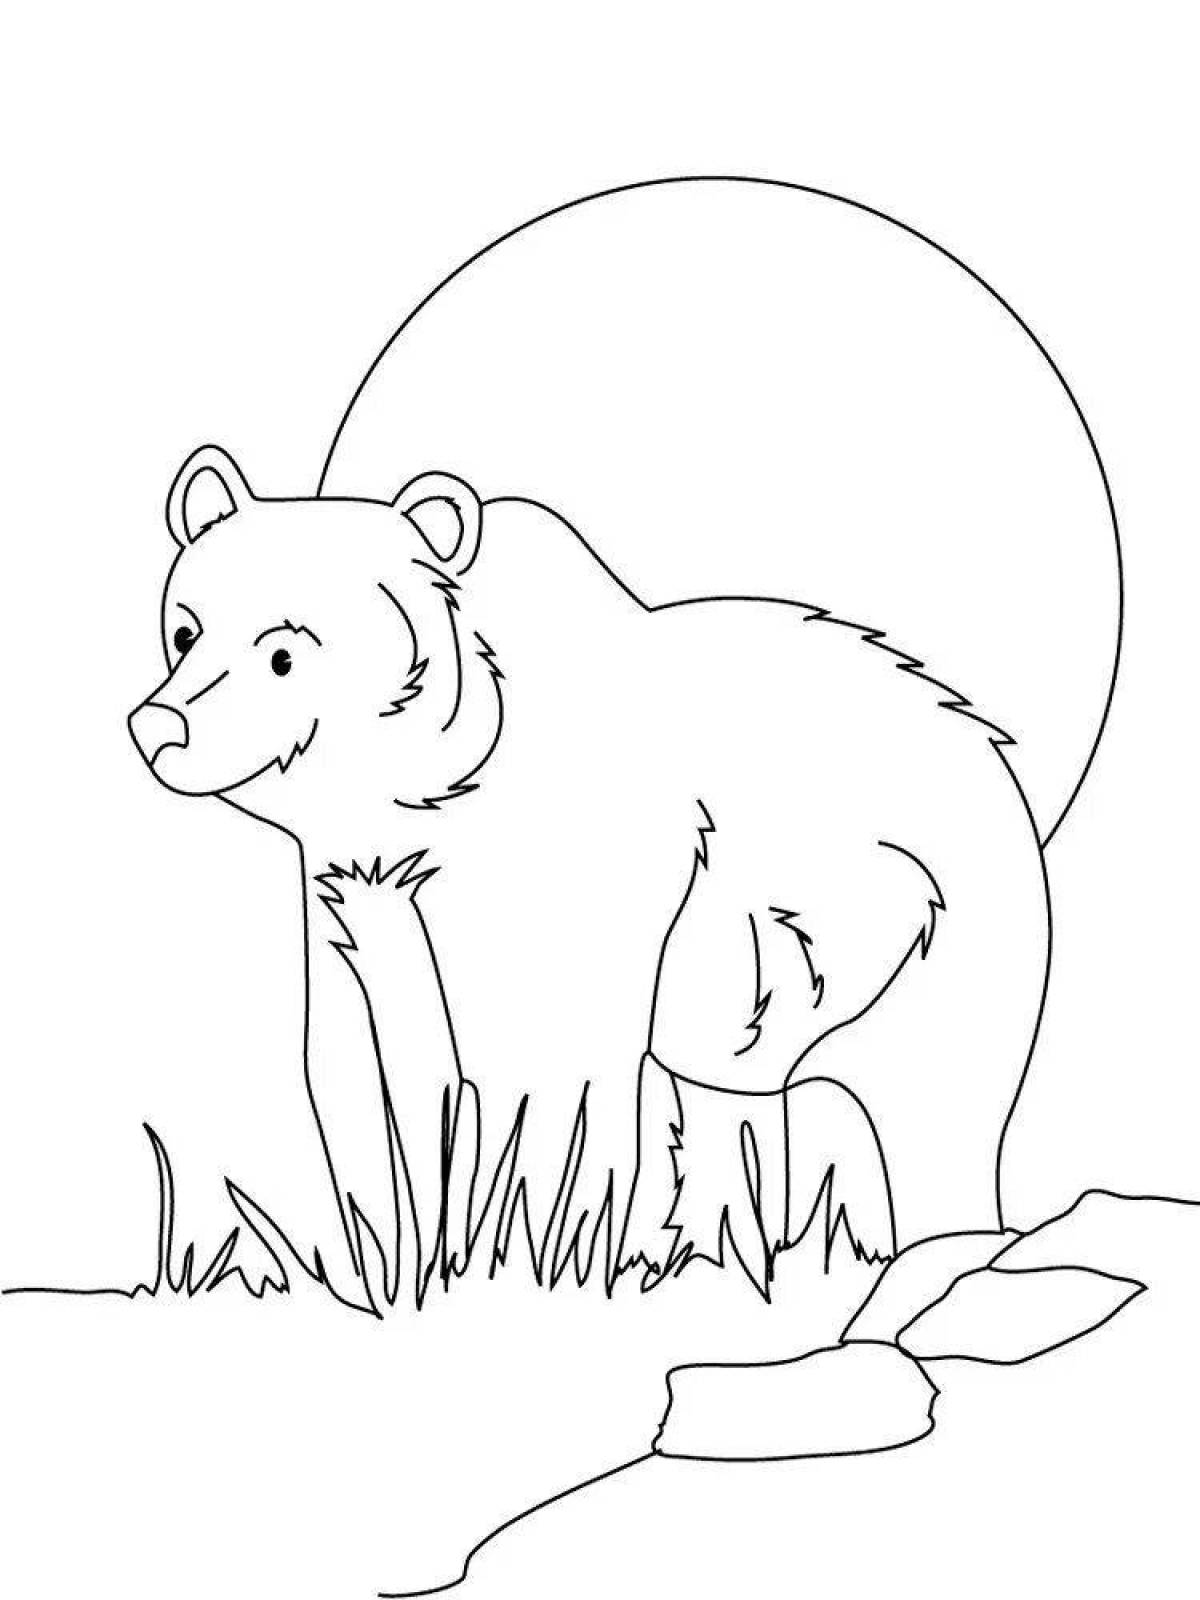 Coloring book adventurous bear in the forest